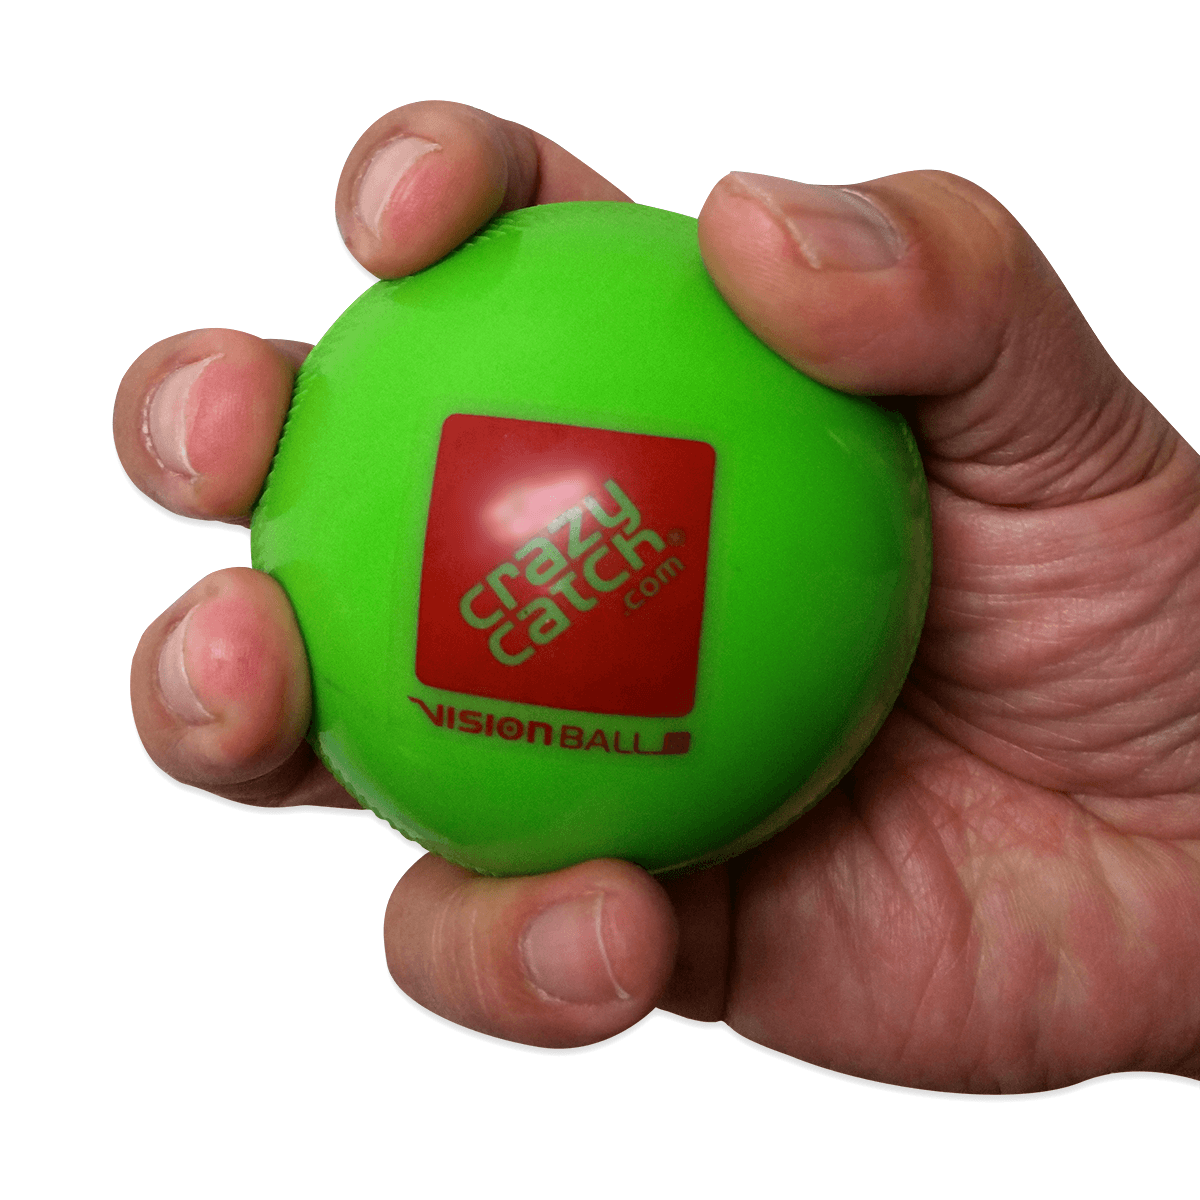 2 Hands -On Ball Logo - Crazy Catch - Sports Training Ball, Level 2, Improves Agility for ...